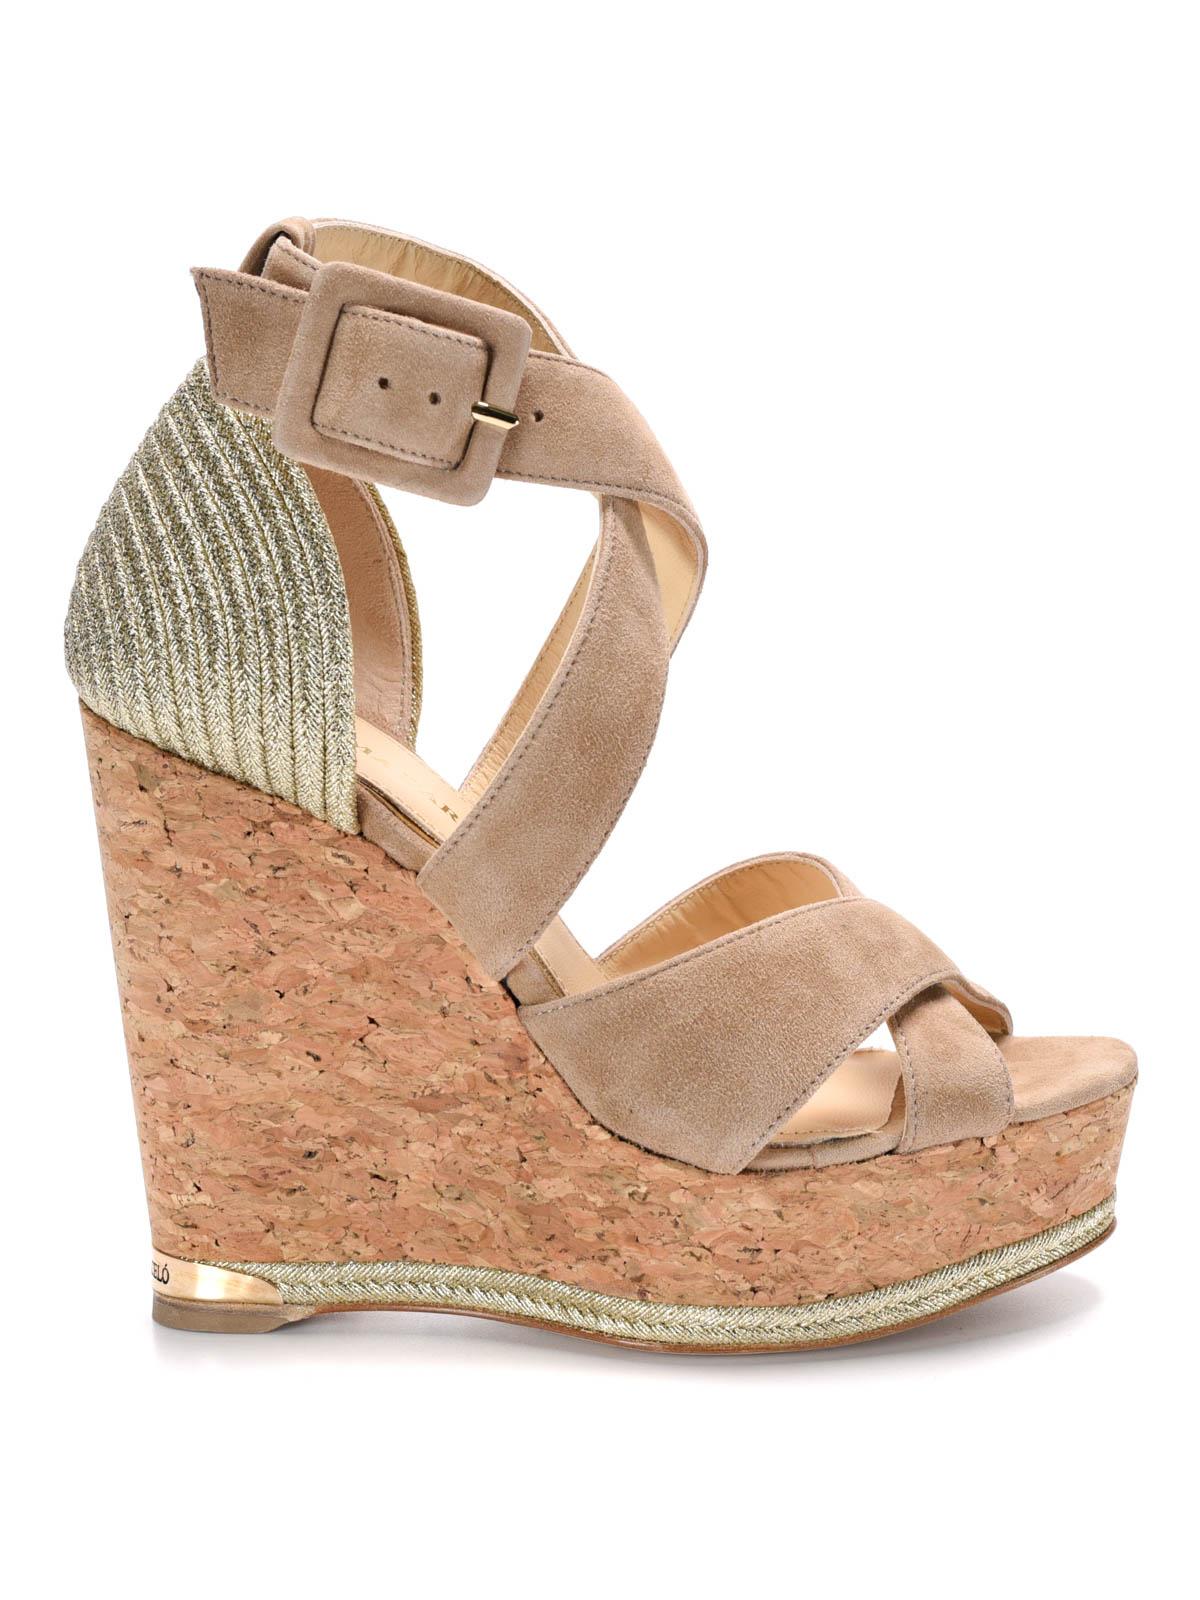 Paloma Barceló Suede Miranda Cork Wedge Sandals in Natural - Lyst